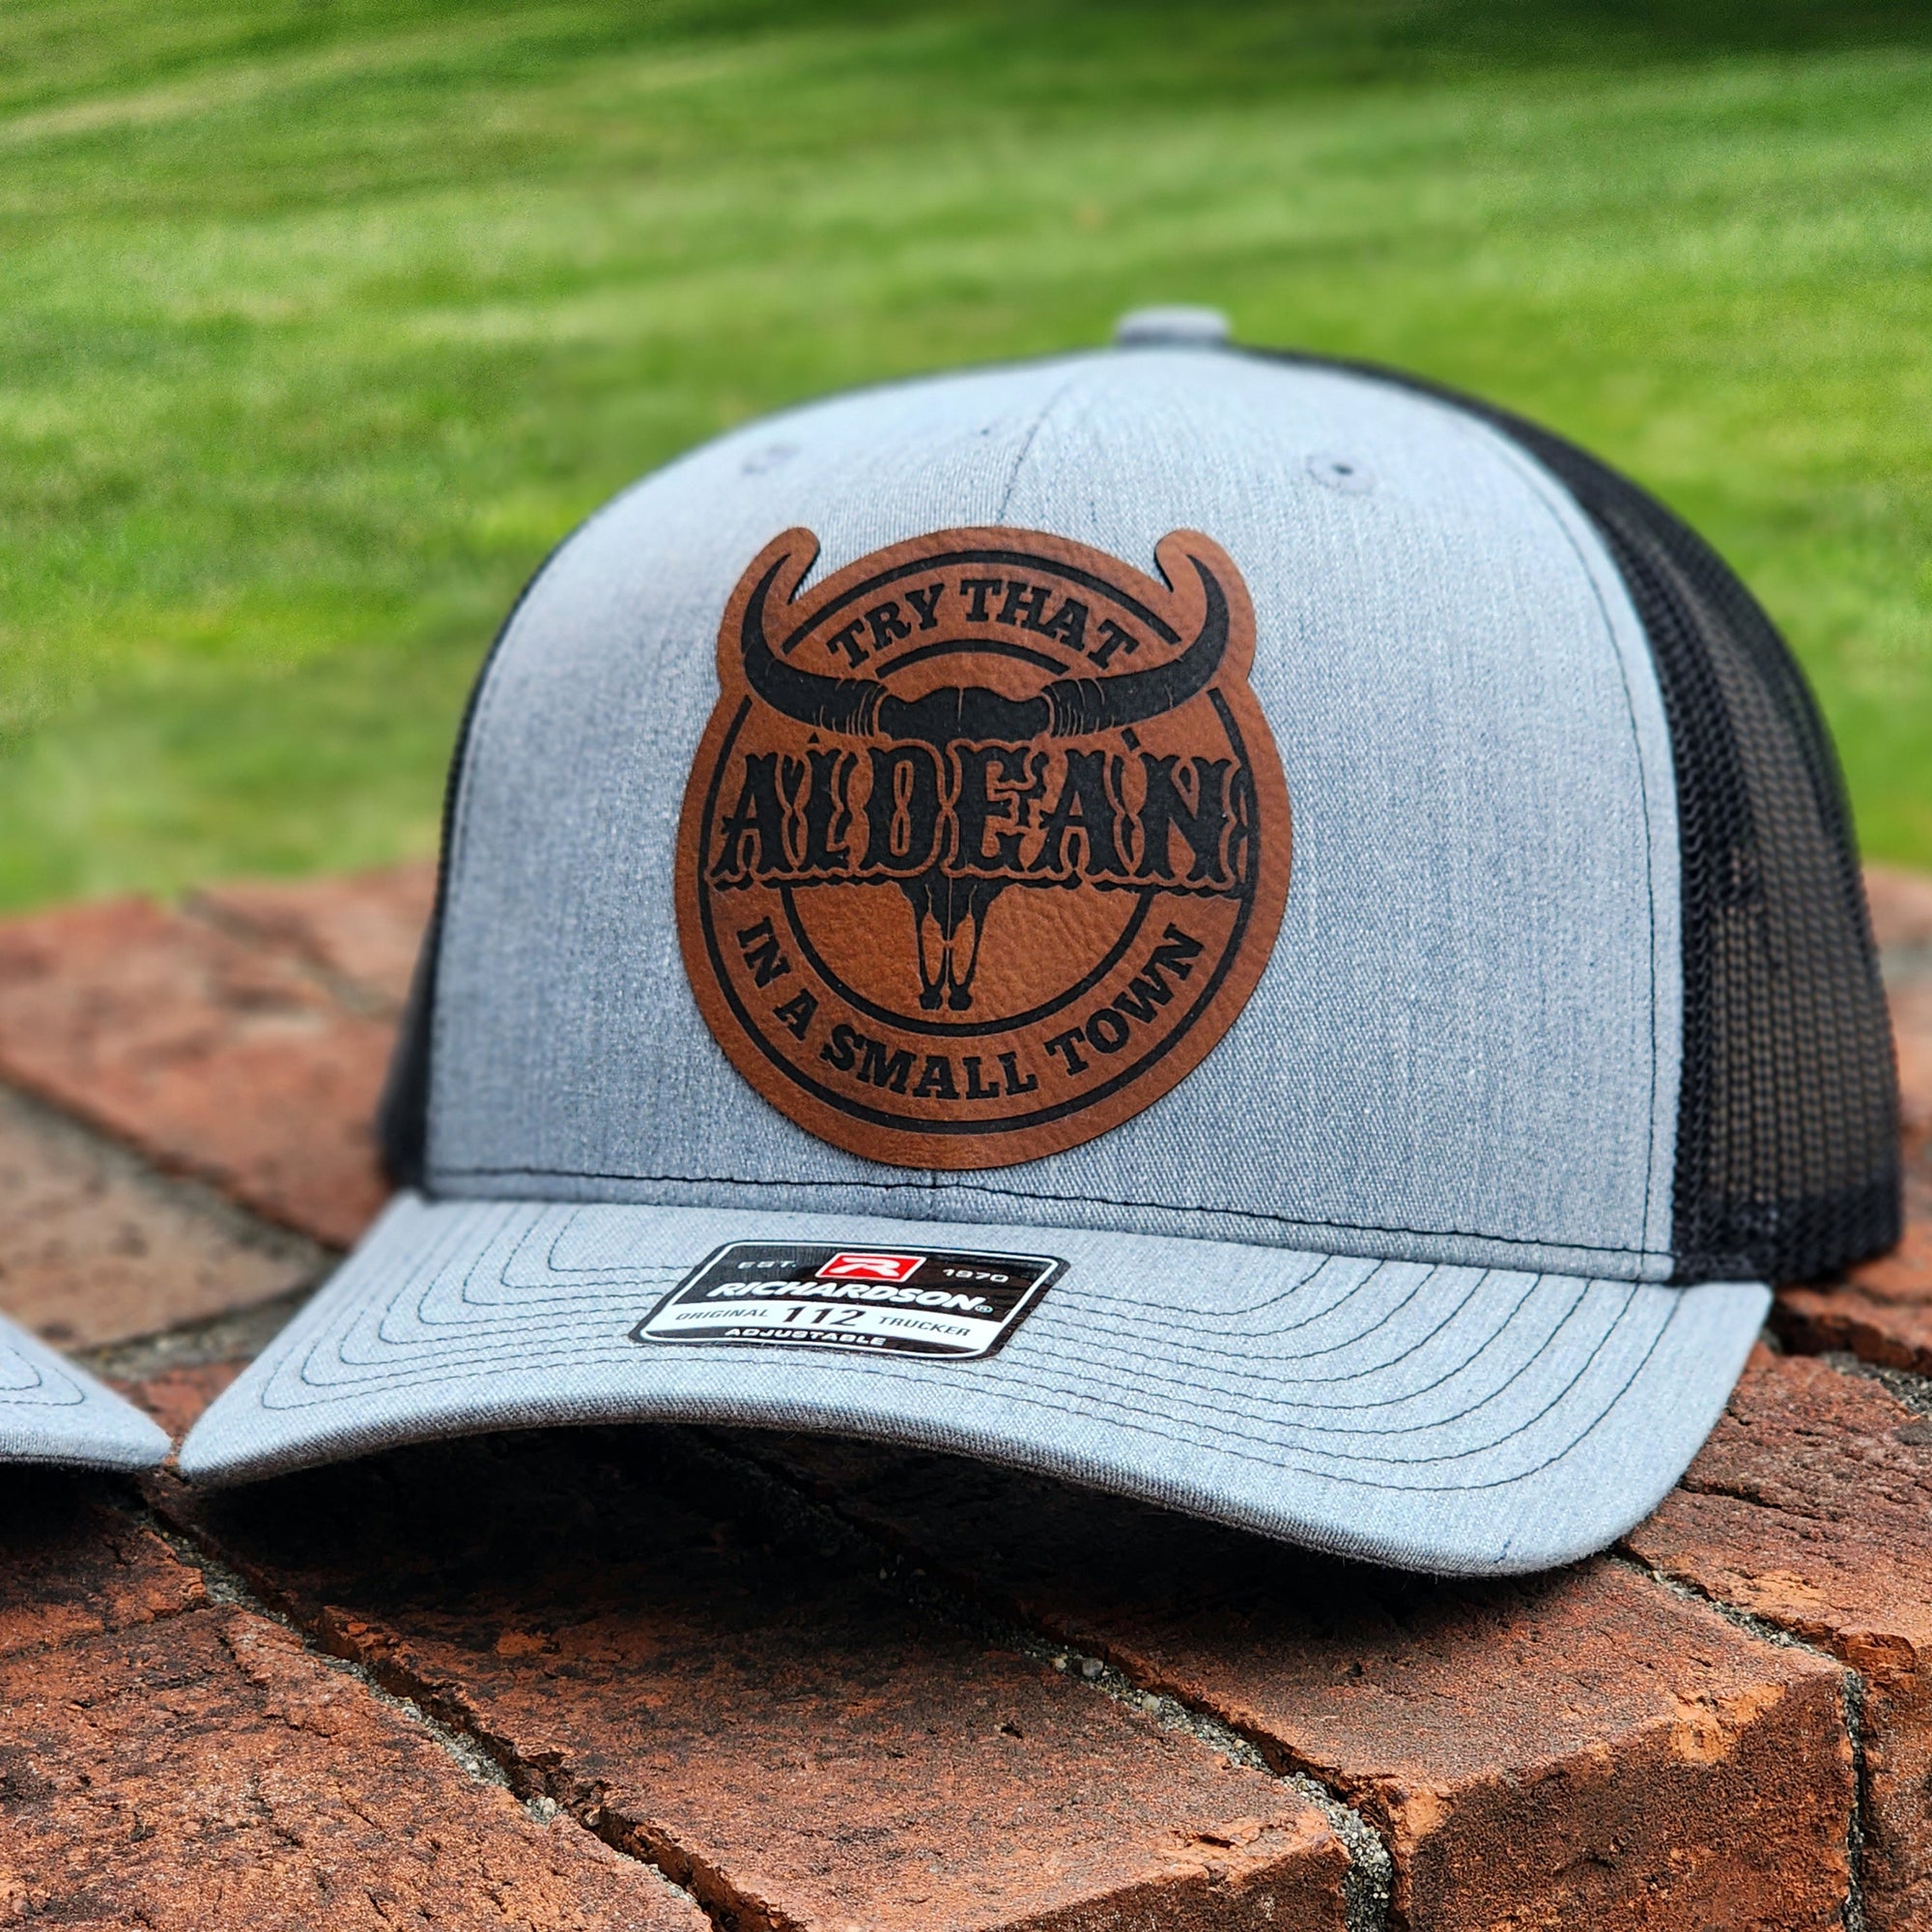 Try That In A Small Town Circular Patch - Heather Grey and Black Richardson 112 Trucker Hat